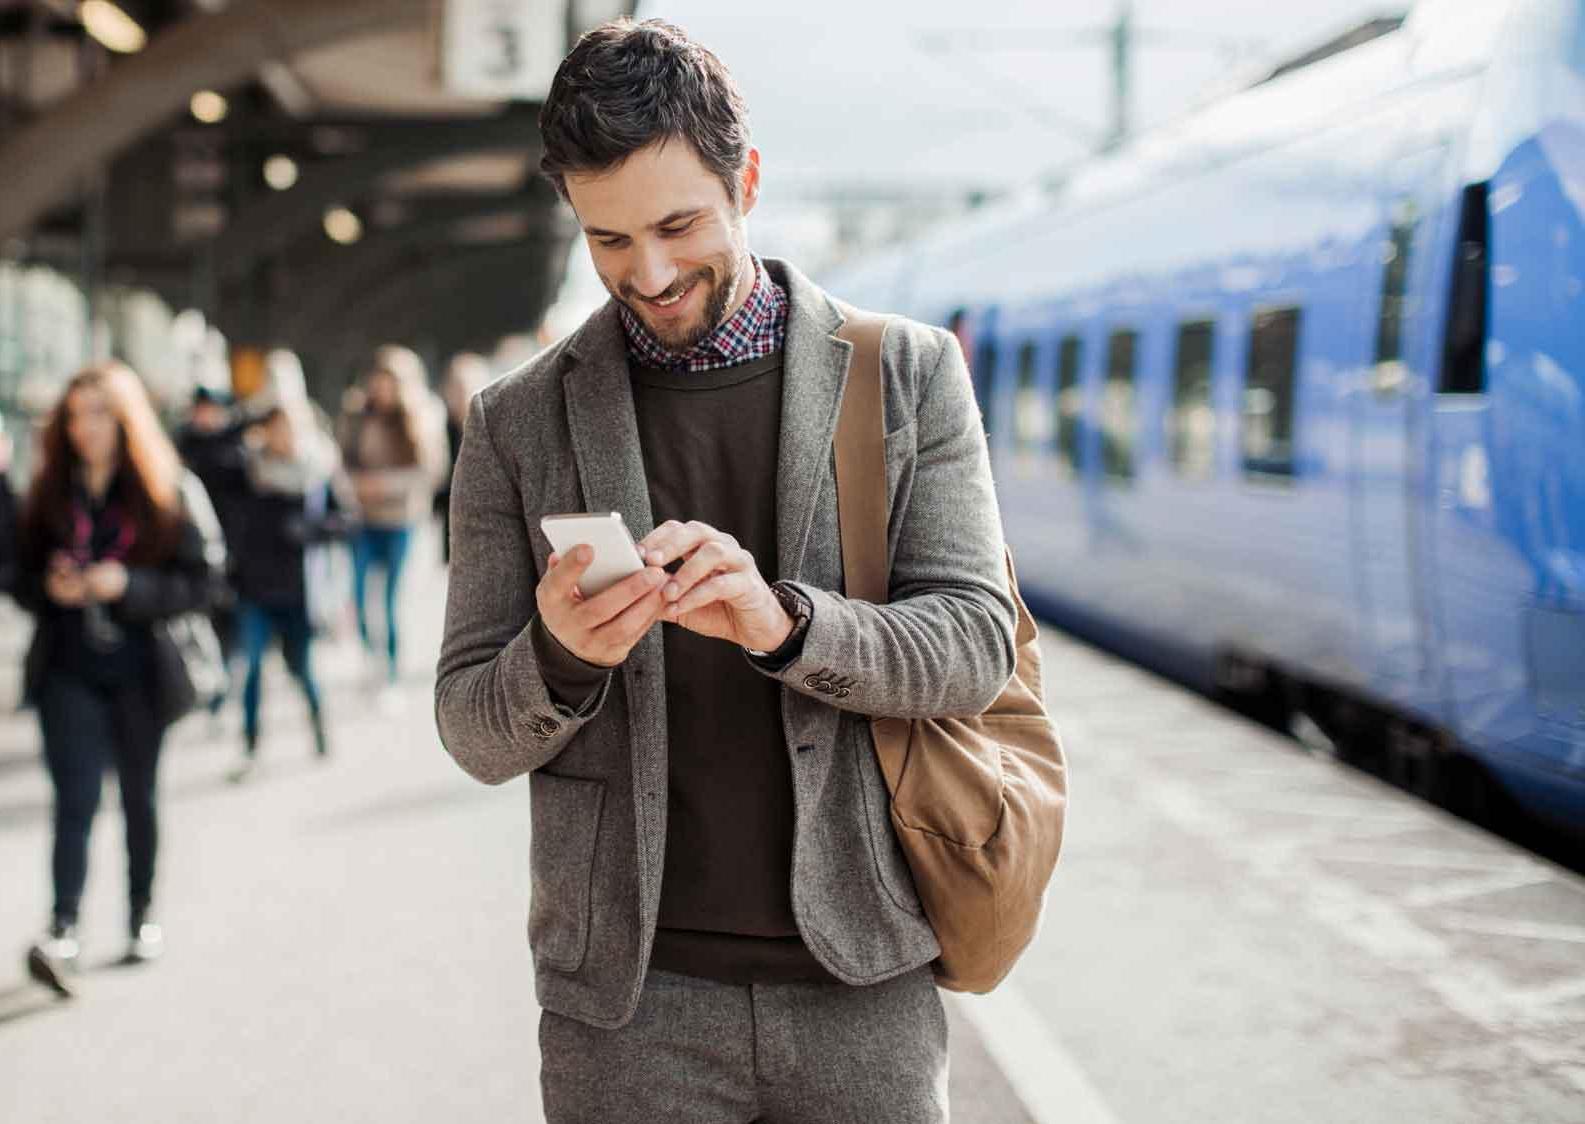 Businessman using mobile phone at train station